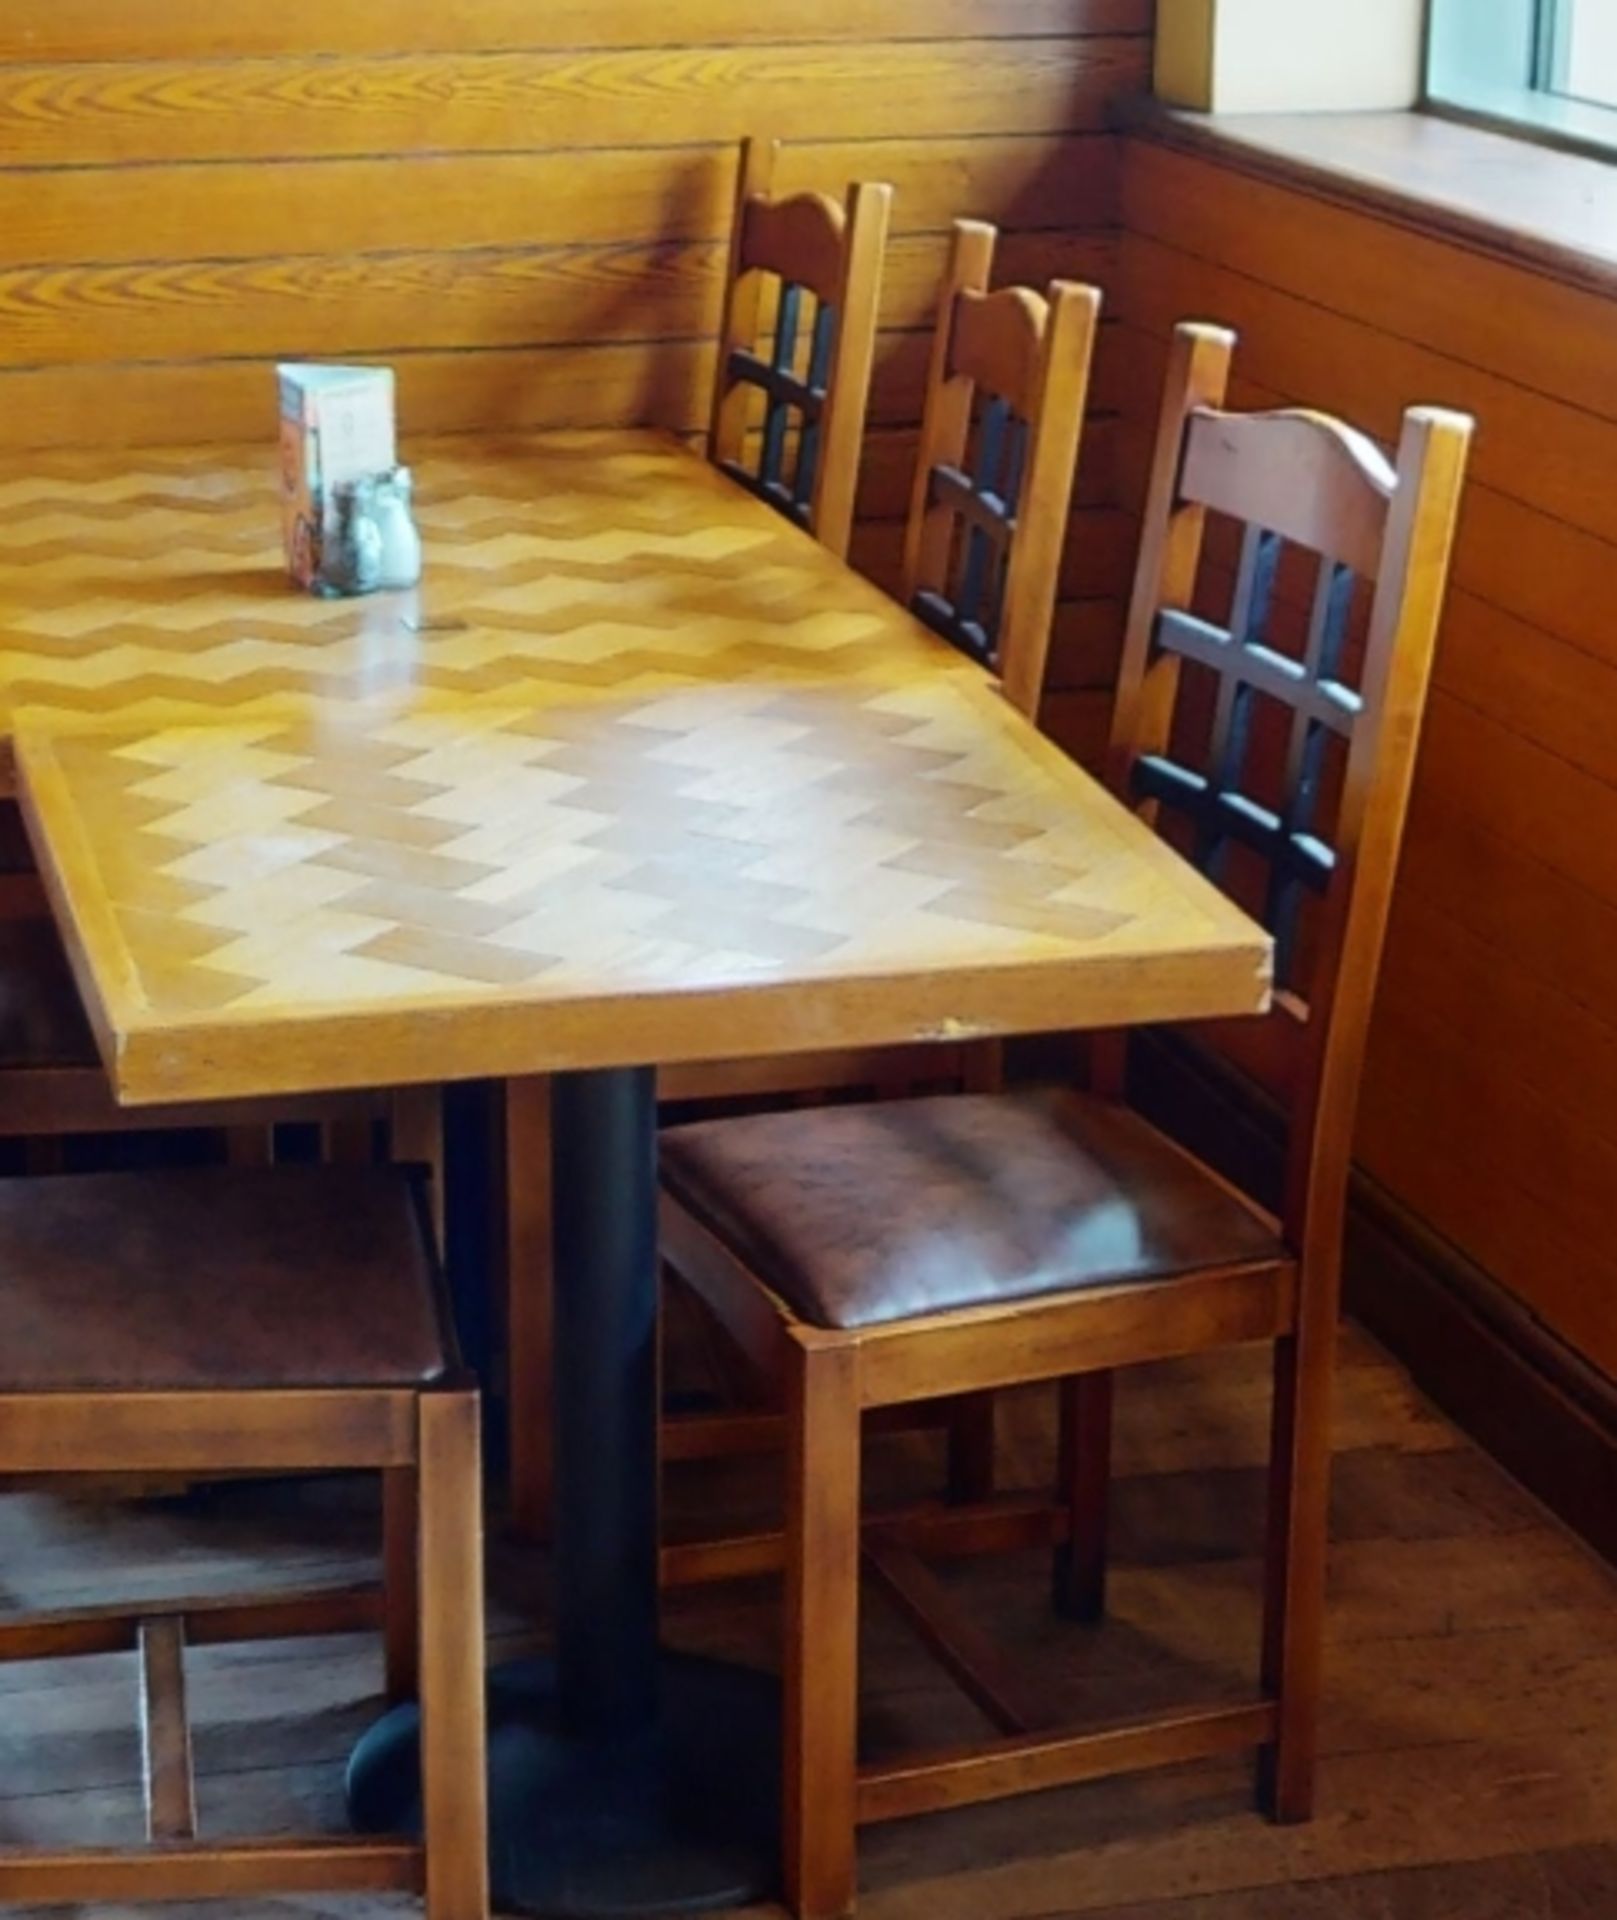 10 x Restaurant High Back Dining Chairs With Faux Leather Brown Seat Pads and Lattice Backs - Approx - Image 3 of 3